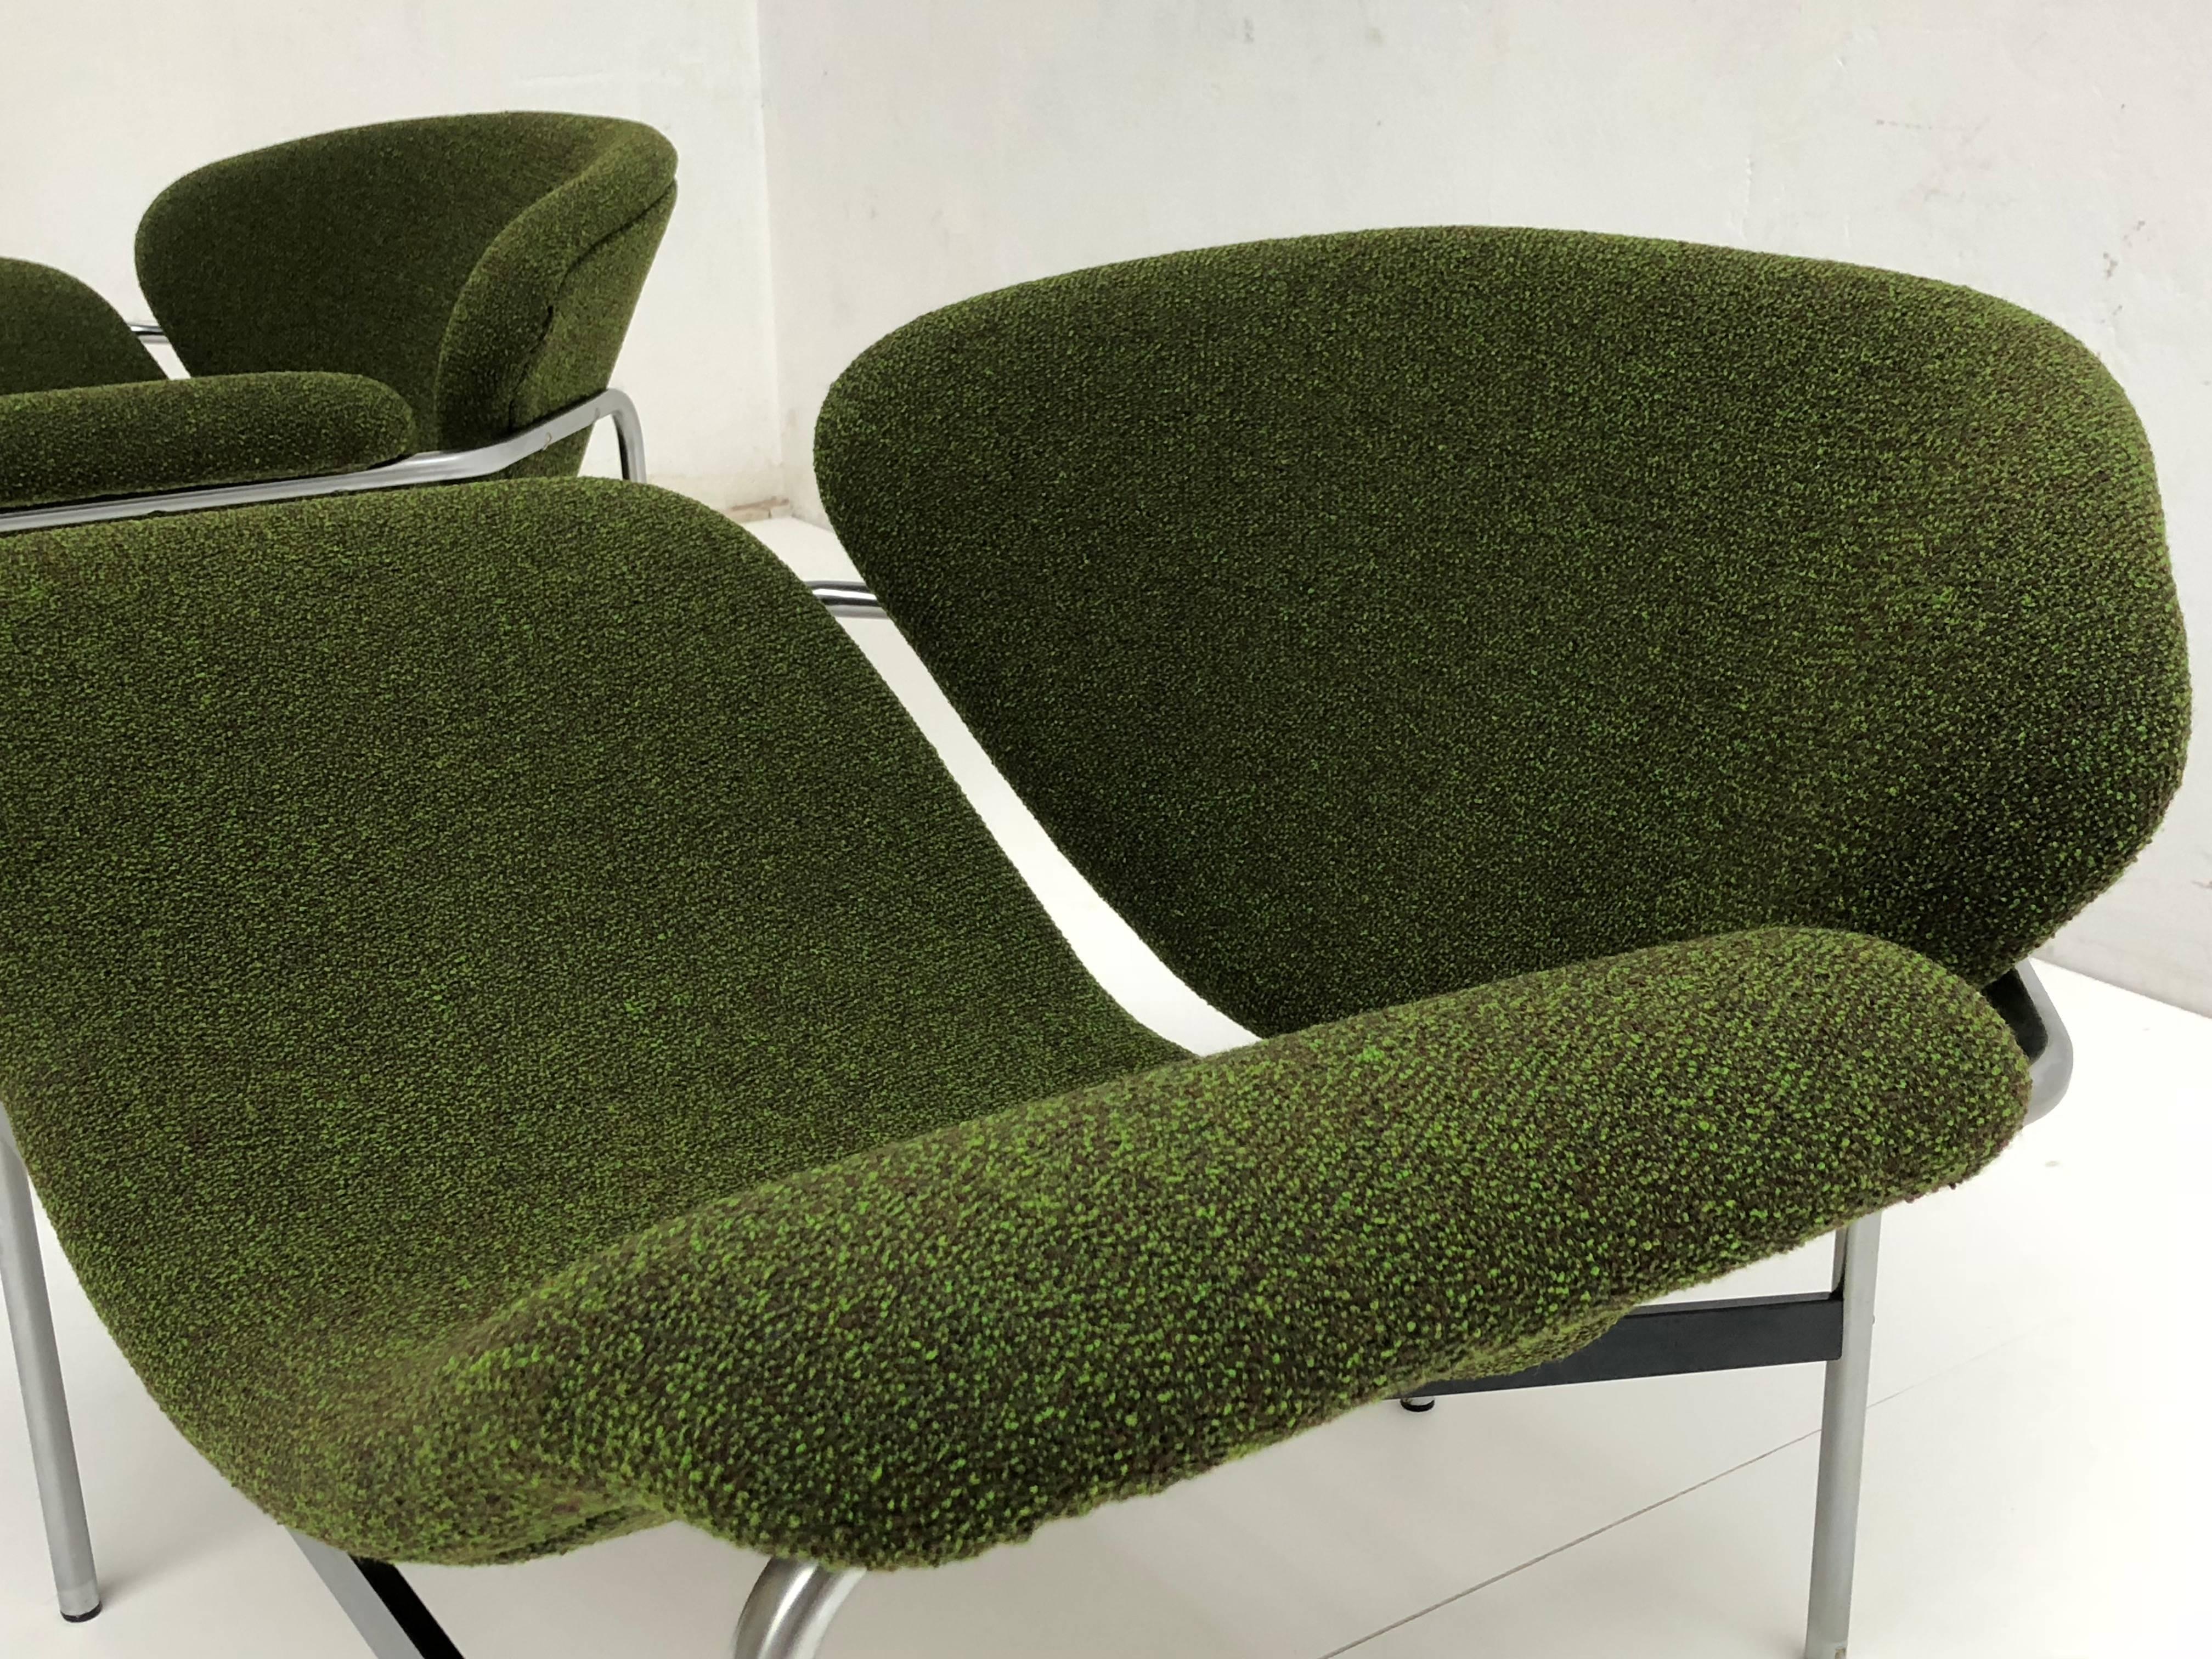 This is a rare pair of fully restored and new reupholstered Dutch 1960s lounge chairs with a very GROOVY shape!

We did a thorough research trying to identify the manufacturer and designer of this design

The chair's design show the strong